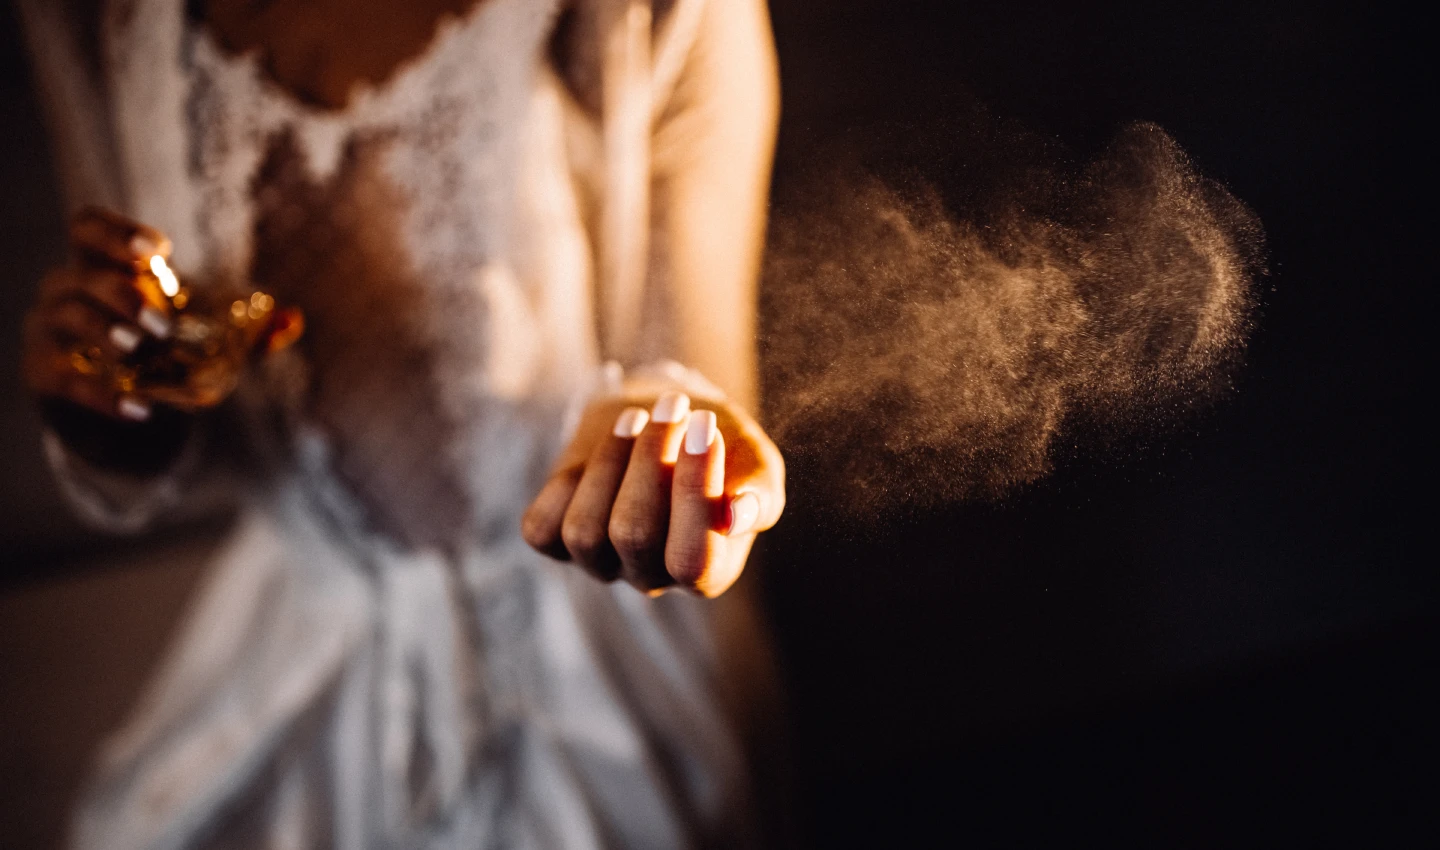 A woman spritzing perfume onto her wrist, embodying the transformative power of scent to boost mood and evoke positive memories